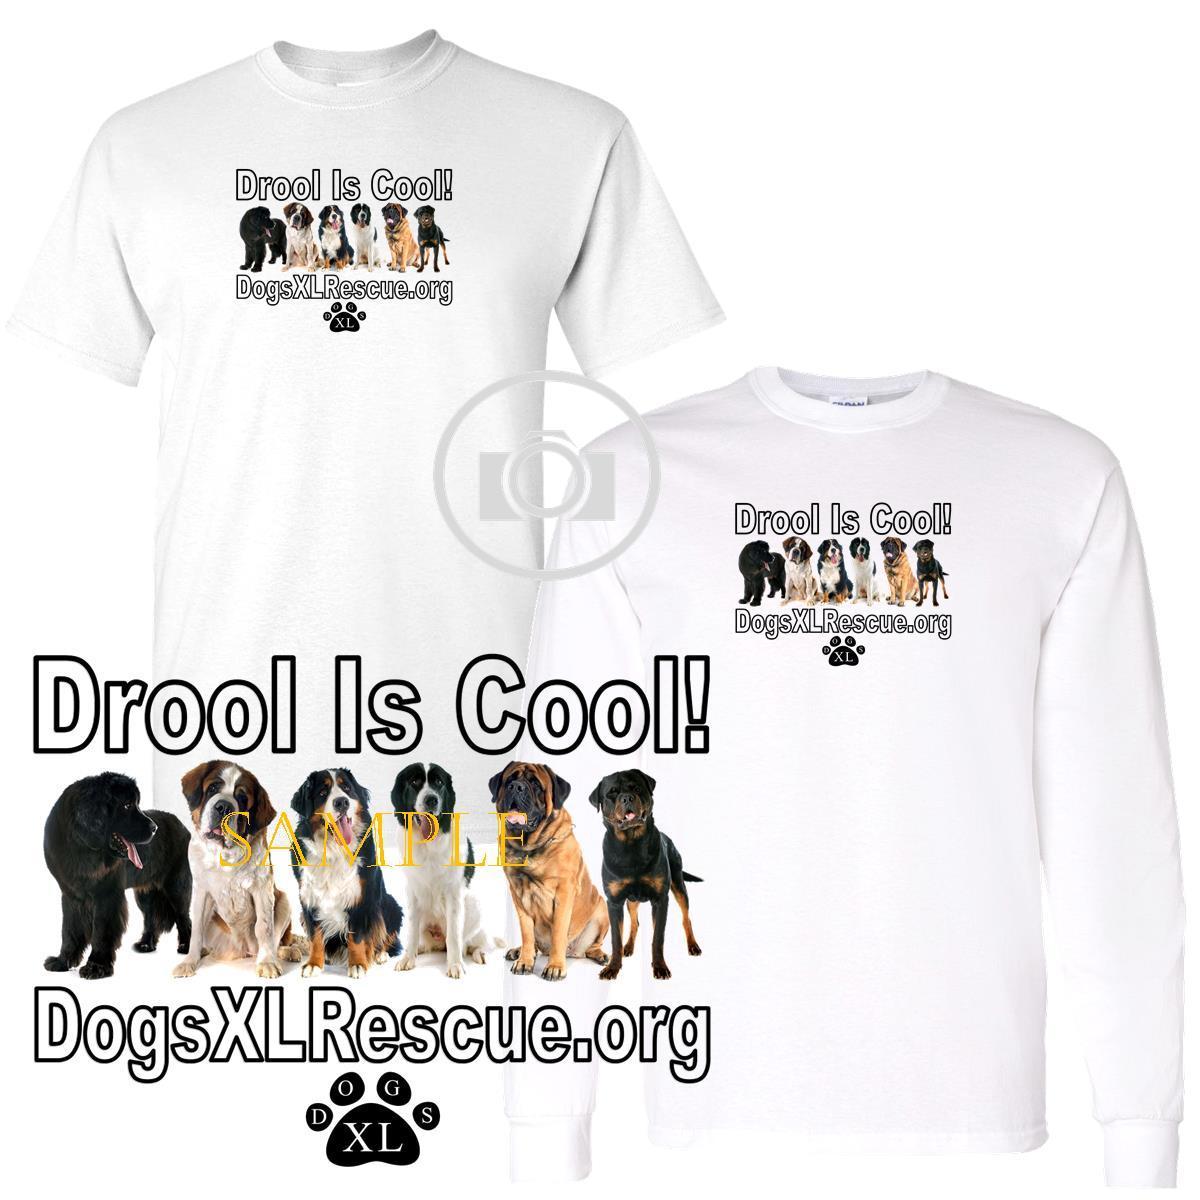 Cool Dogs Logo - Dogs XL Rescue Drool Is Cool! Big Breeds Logo Graphic White T Shirt ...